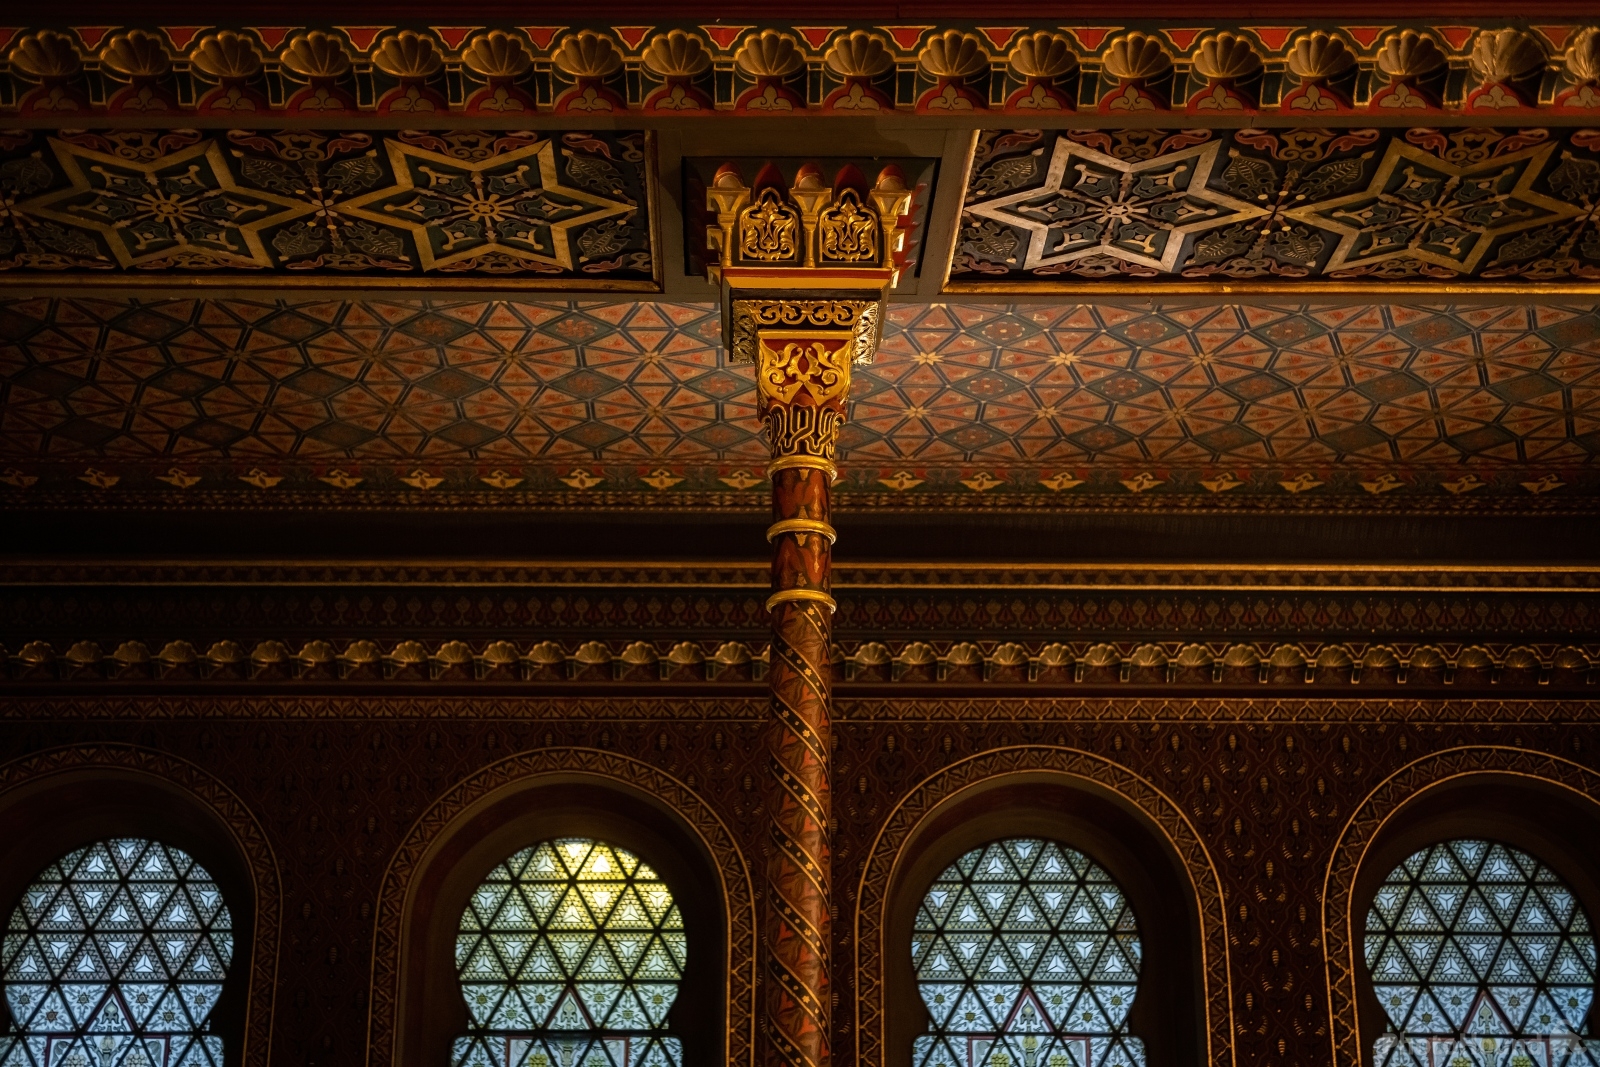 Image of Spanish synagogue in Prague by VOJTa Herout